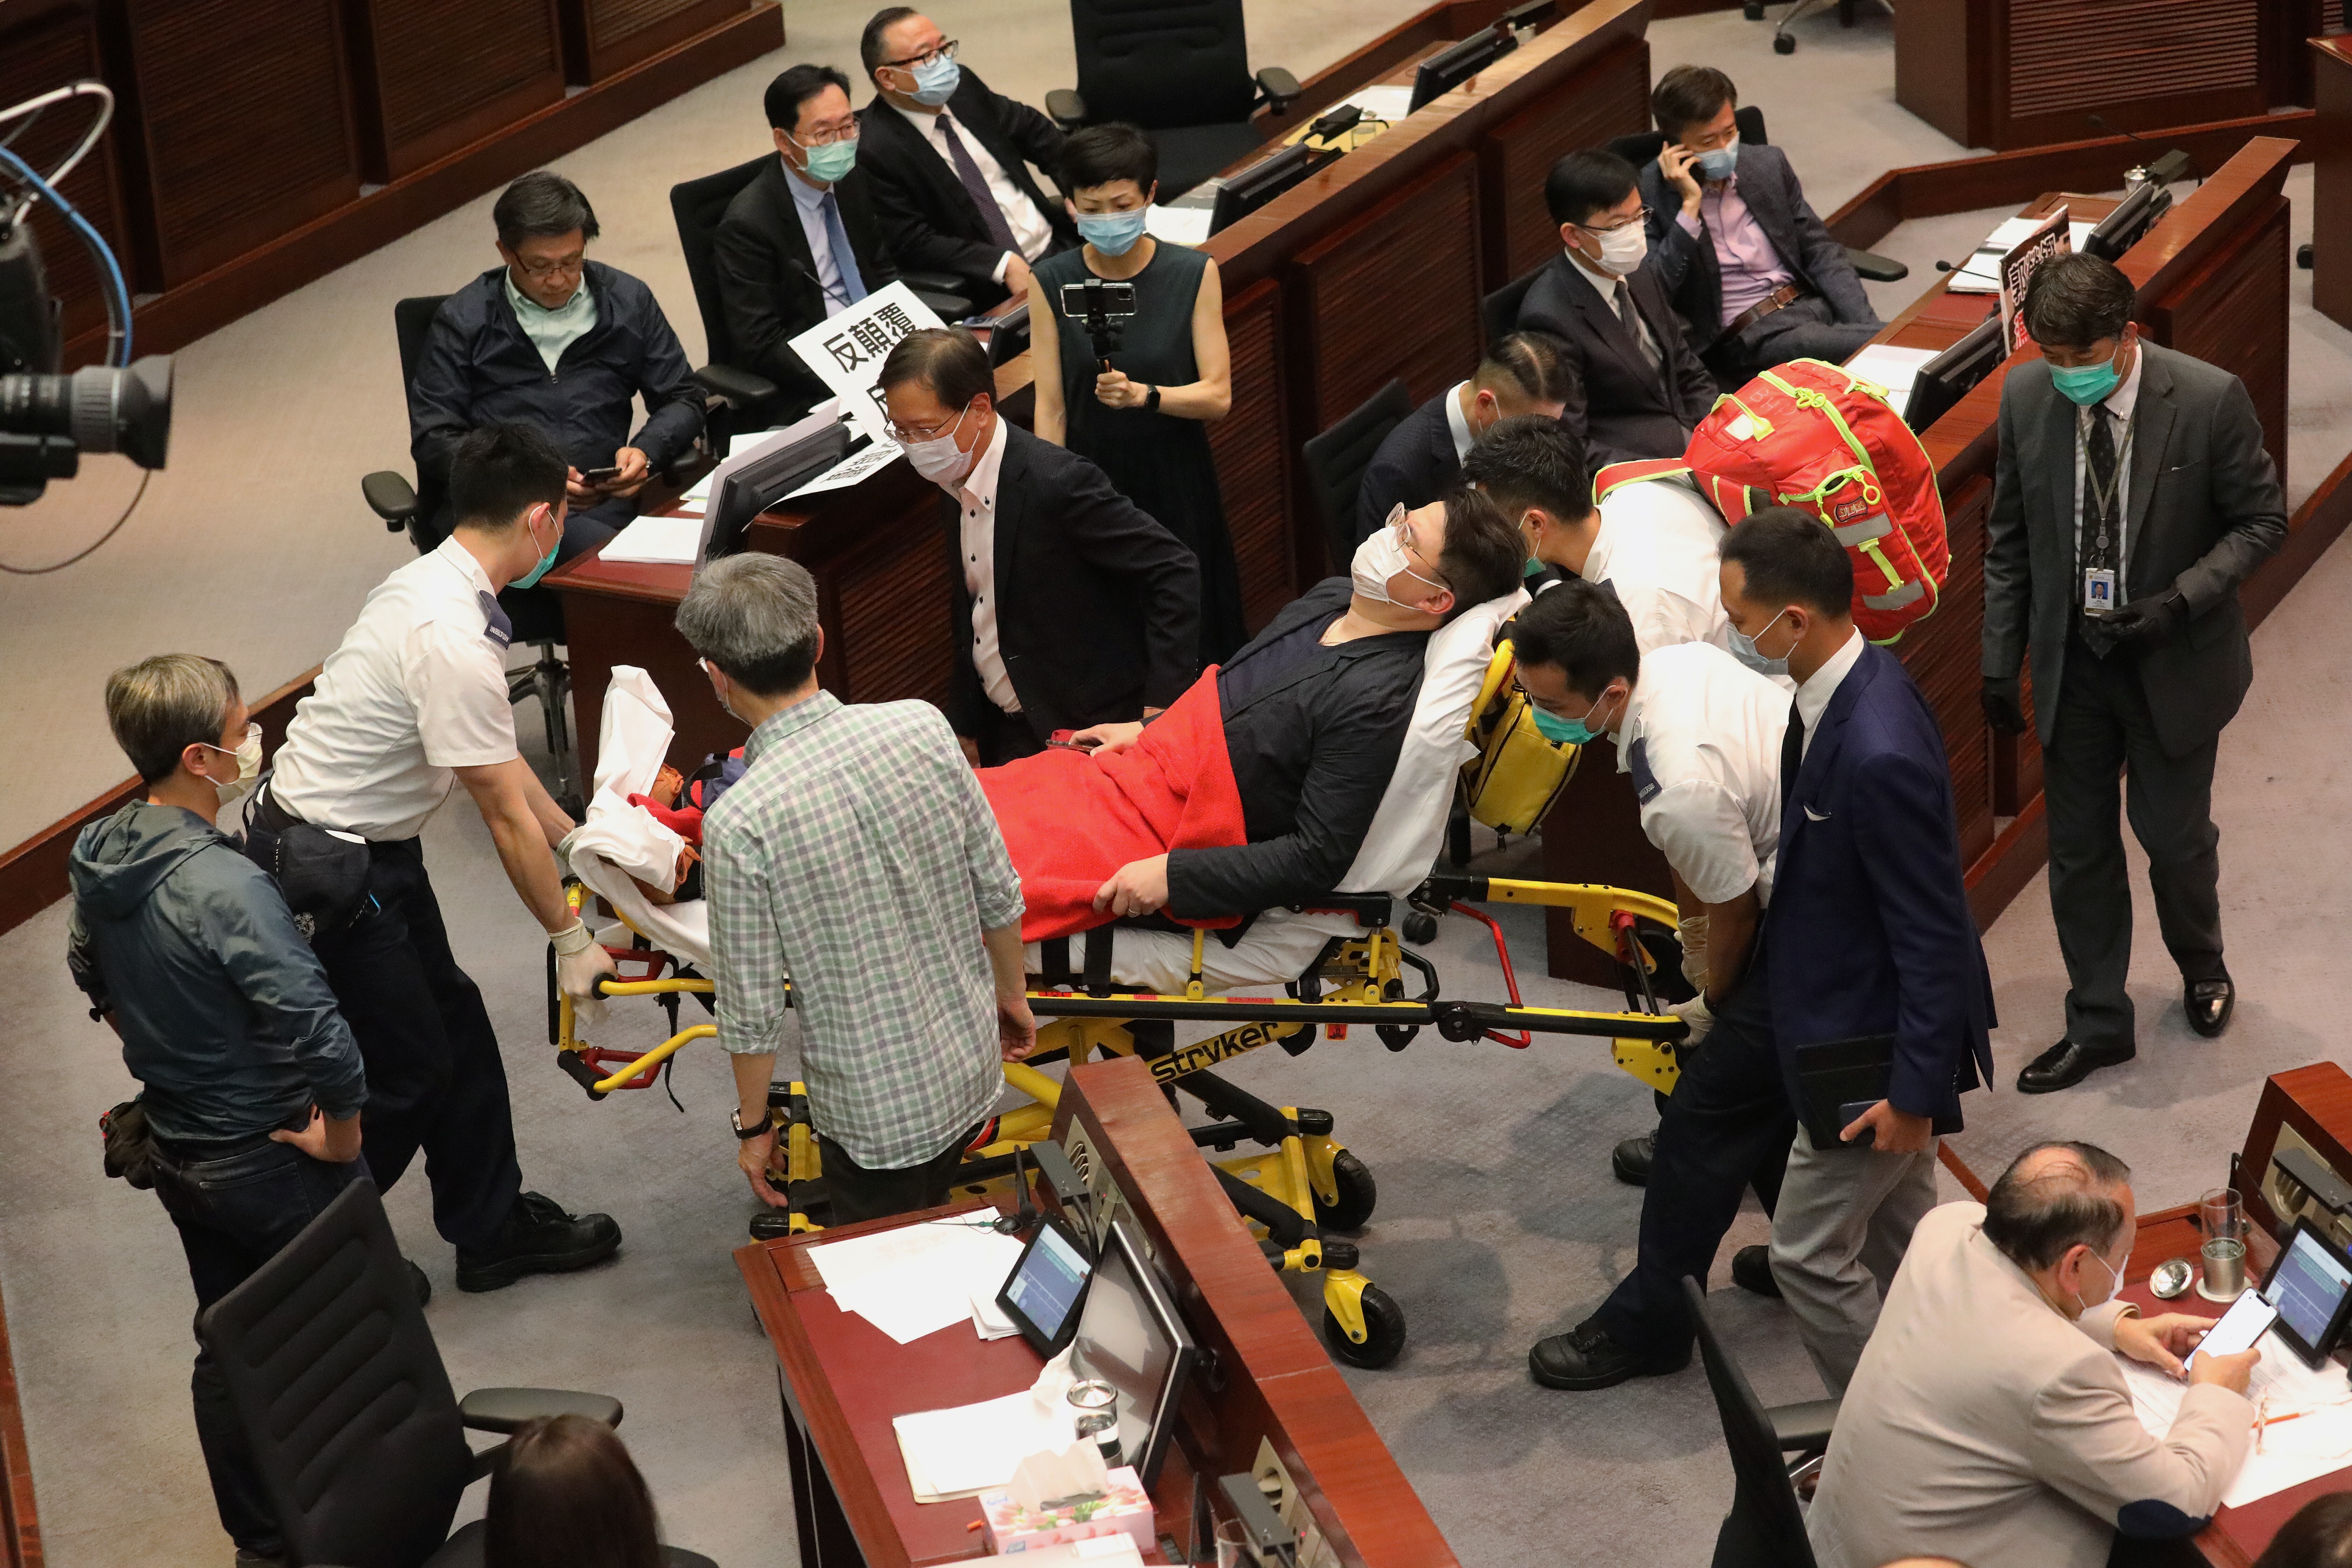 Lawmaker Andrew Wan is carried out by medical staff in Legco as chaos breaks out. Photo: Dickson Lee